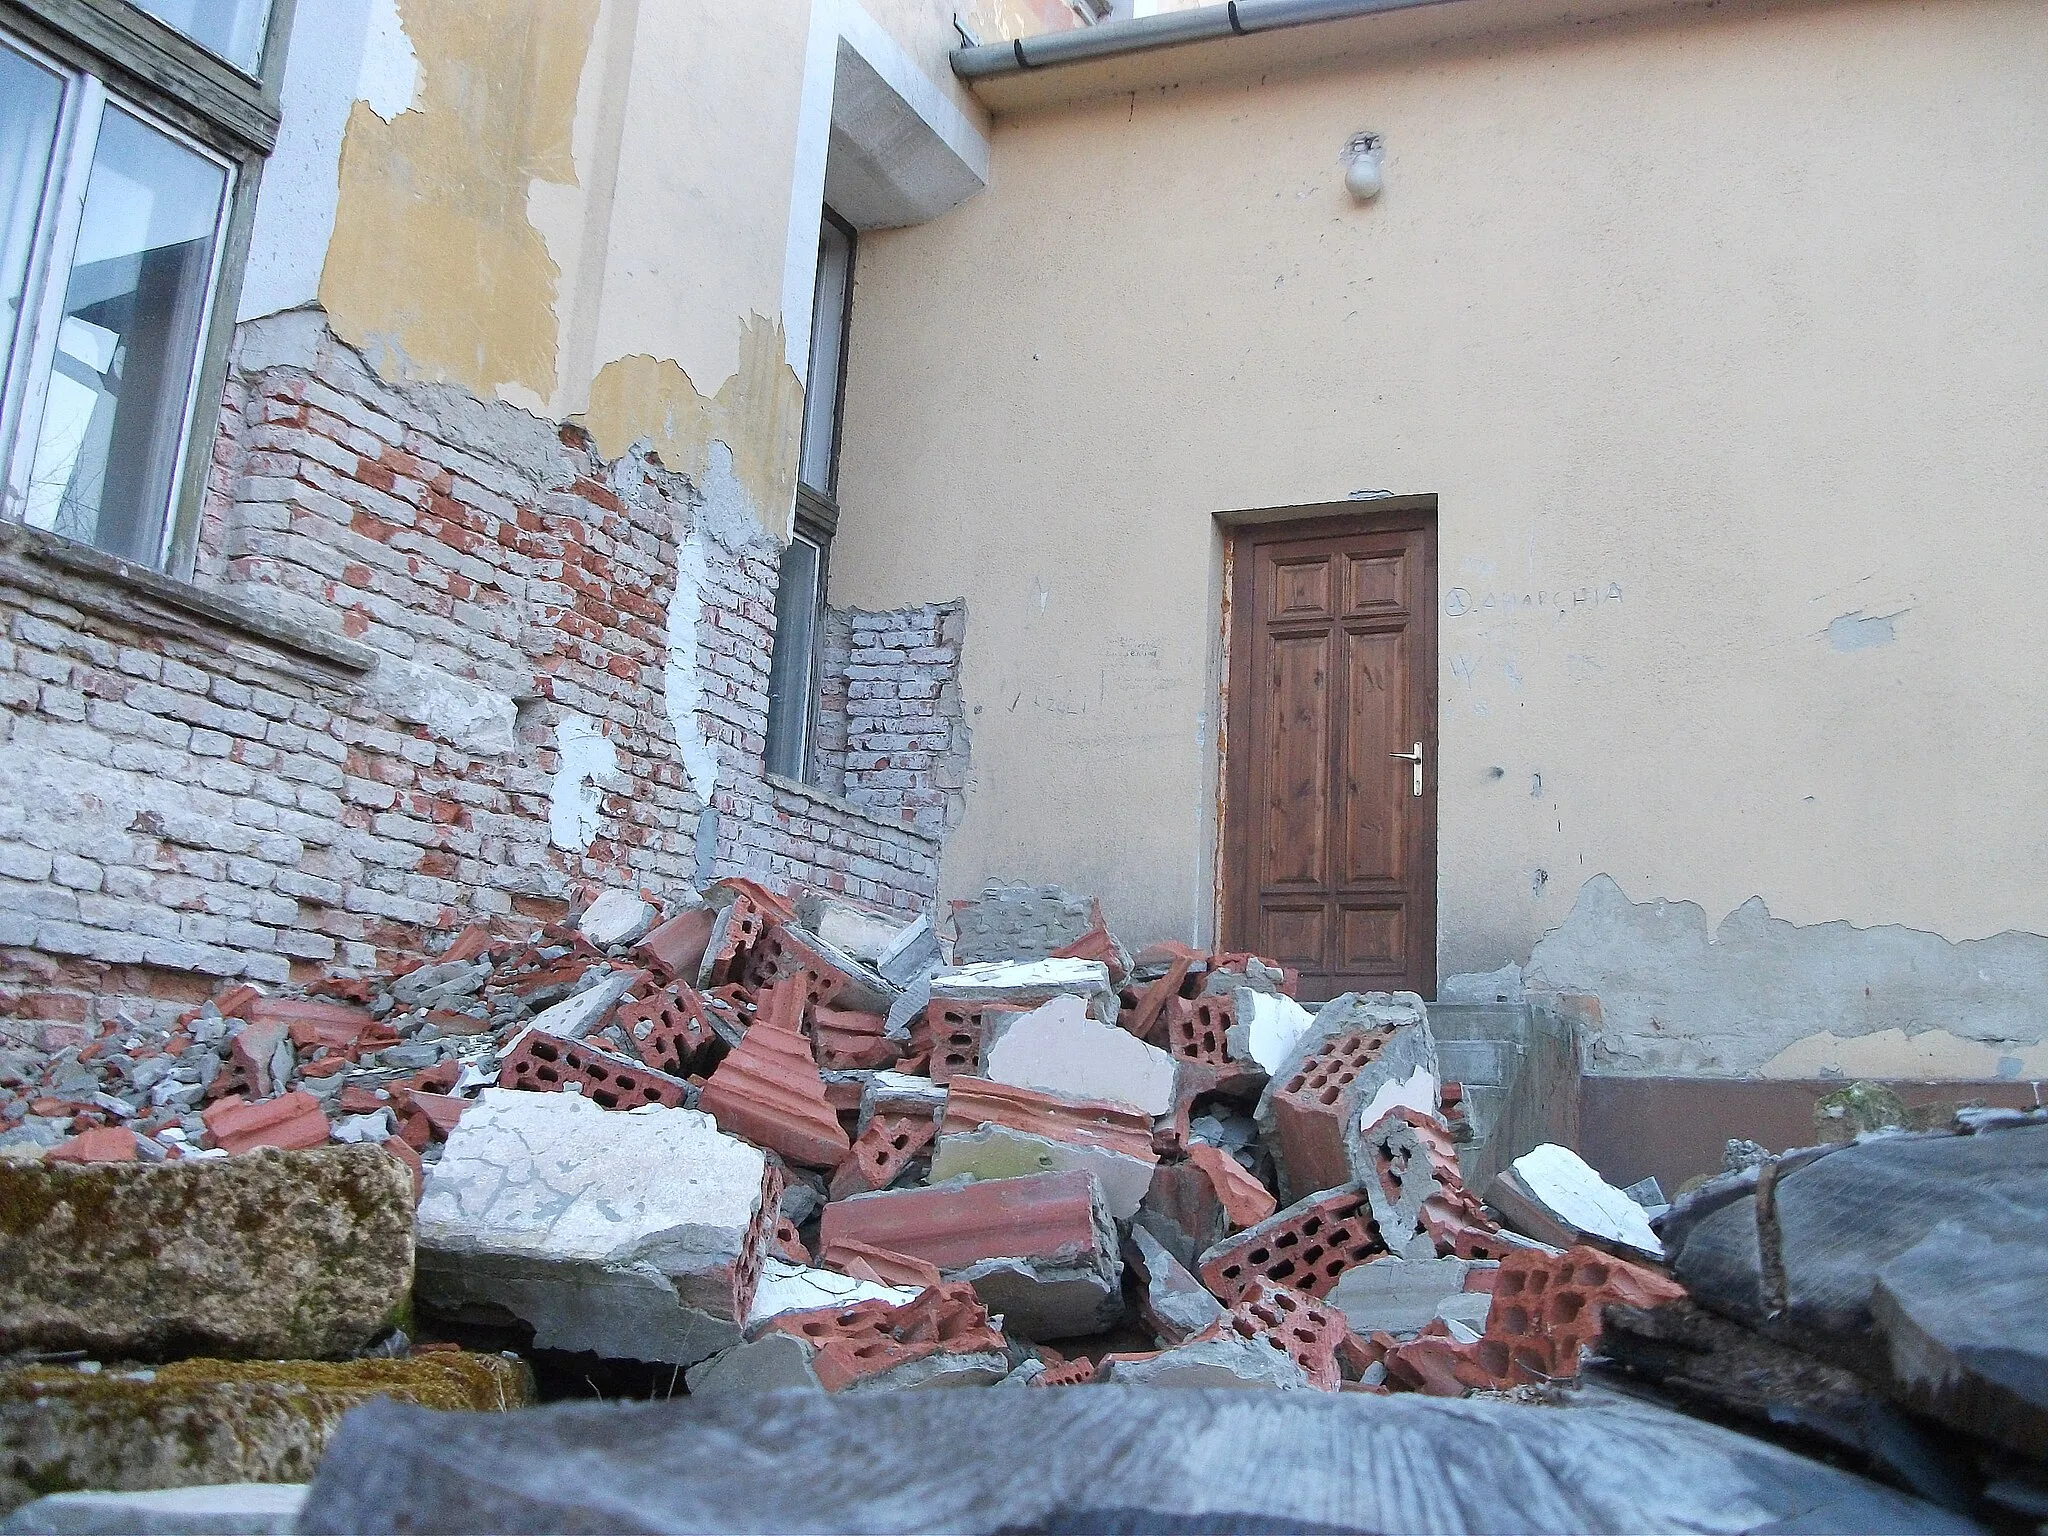 Photo showing: Construction waste near Zichy Mansion in Zichyújfalu, Hungary.